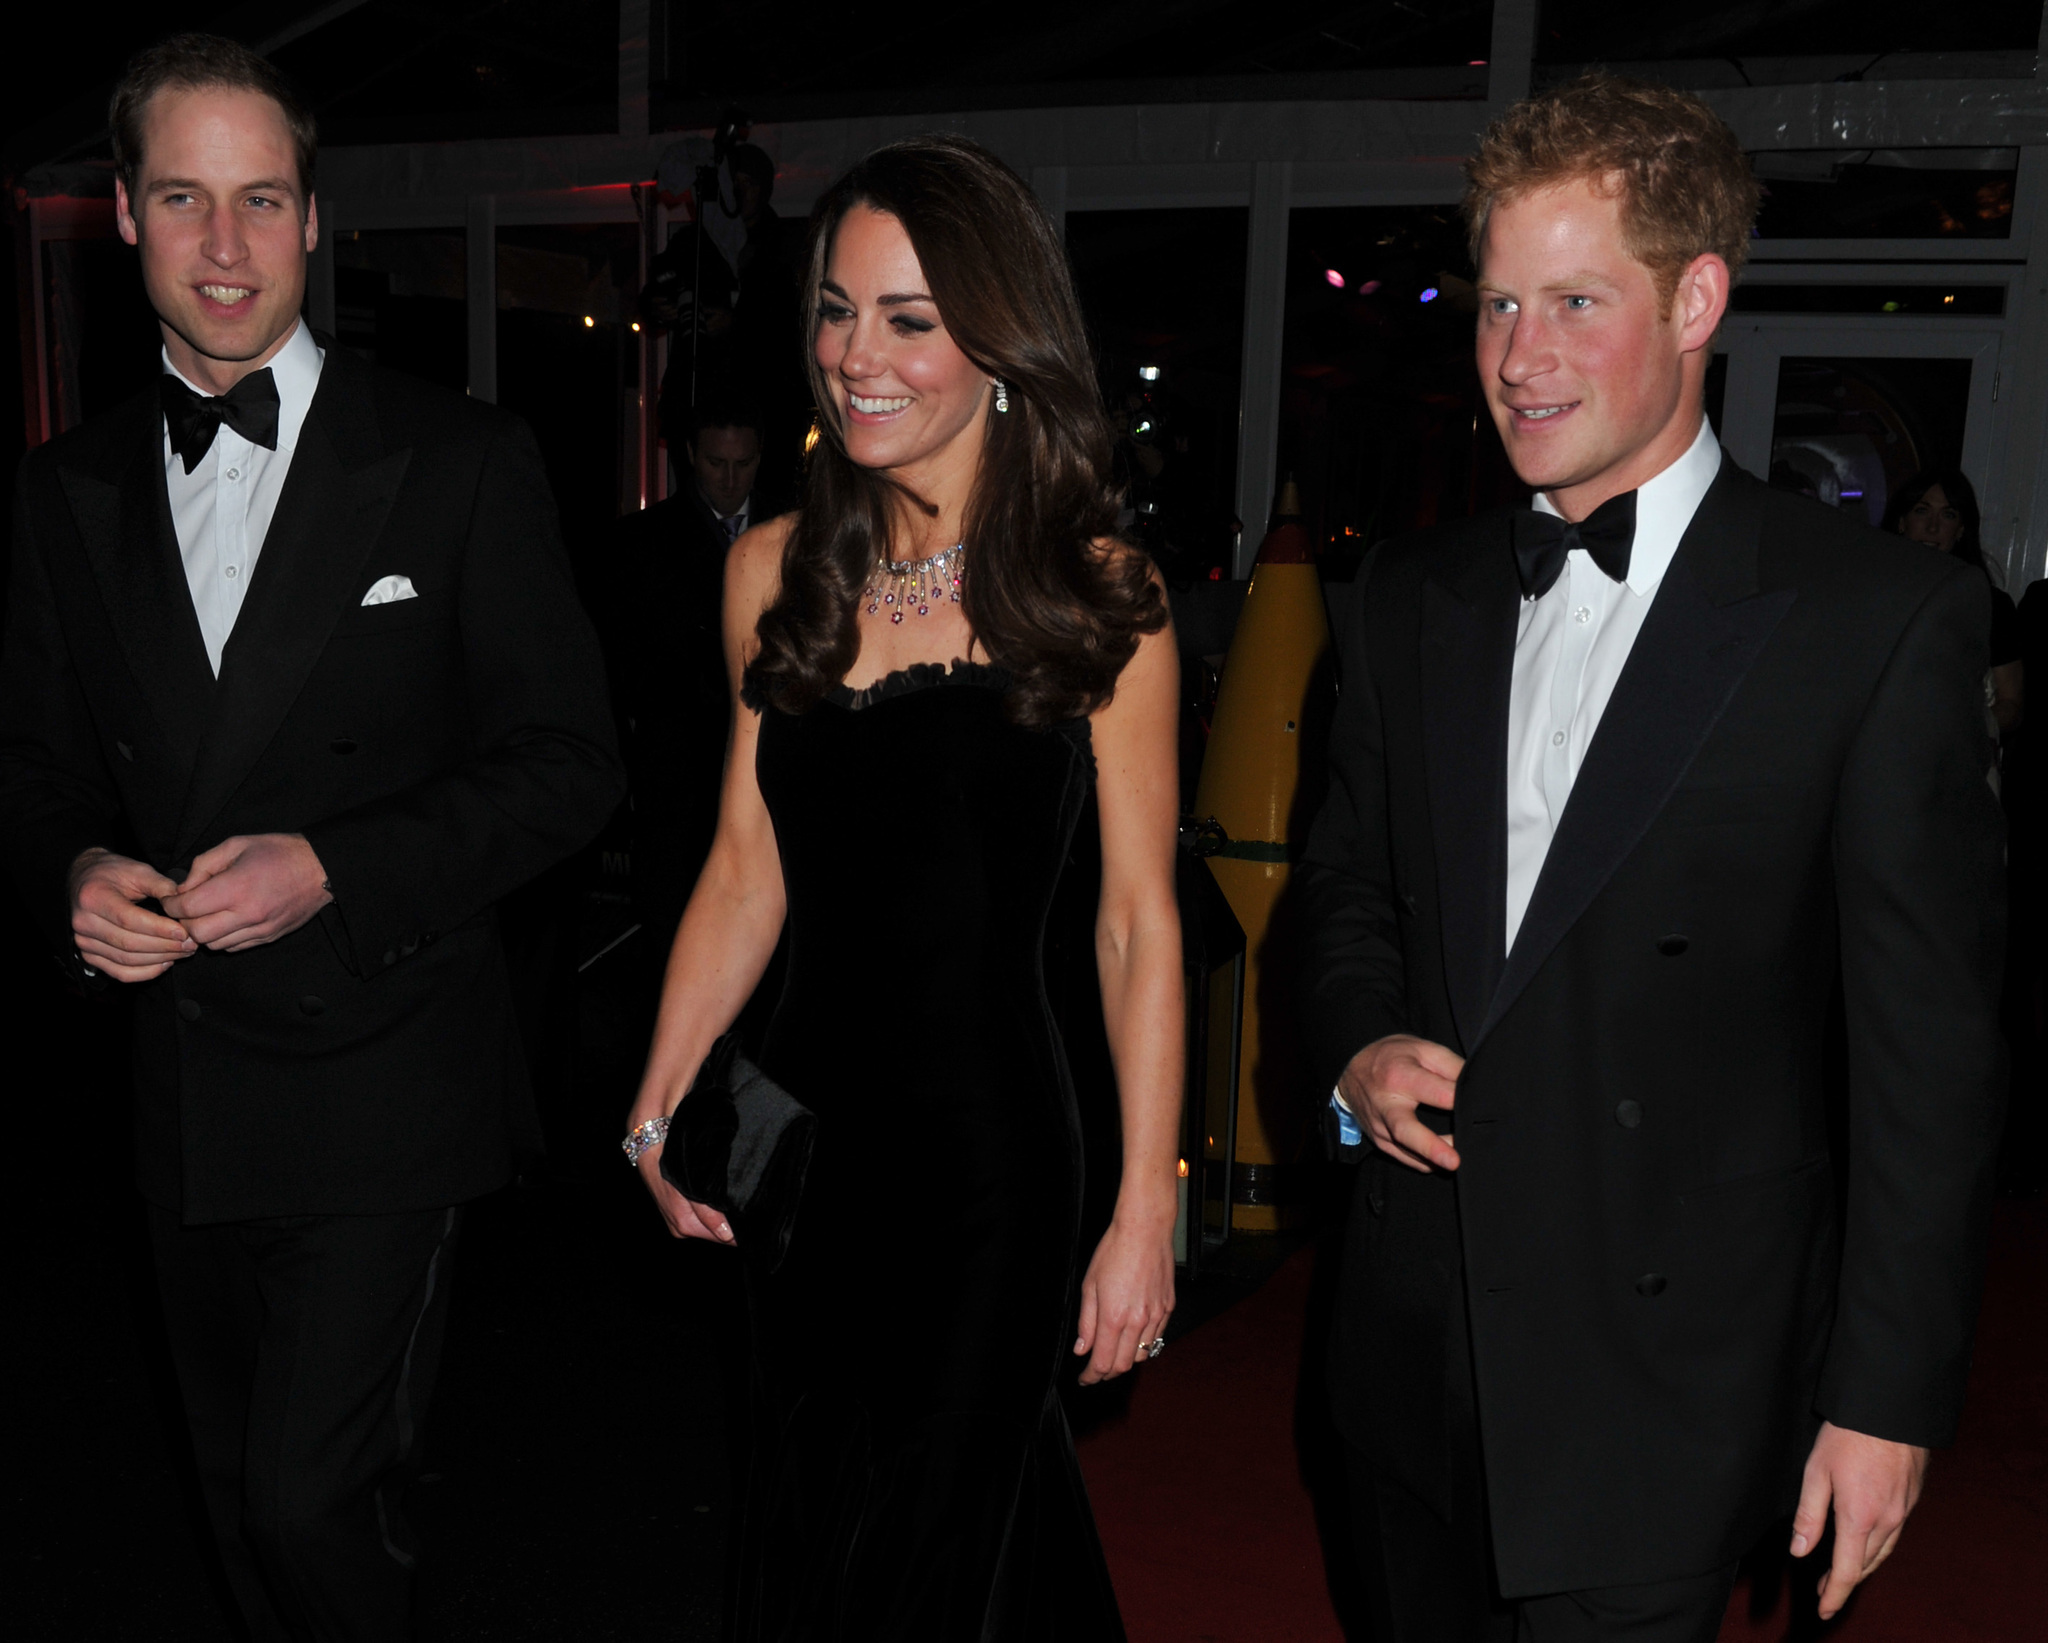 Prince Harry Windsor, Prince William and Catherine Duchess of Cambridge